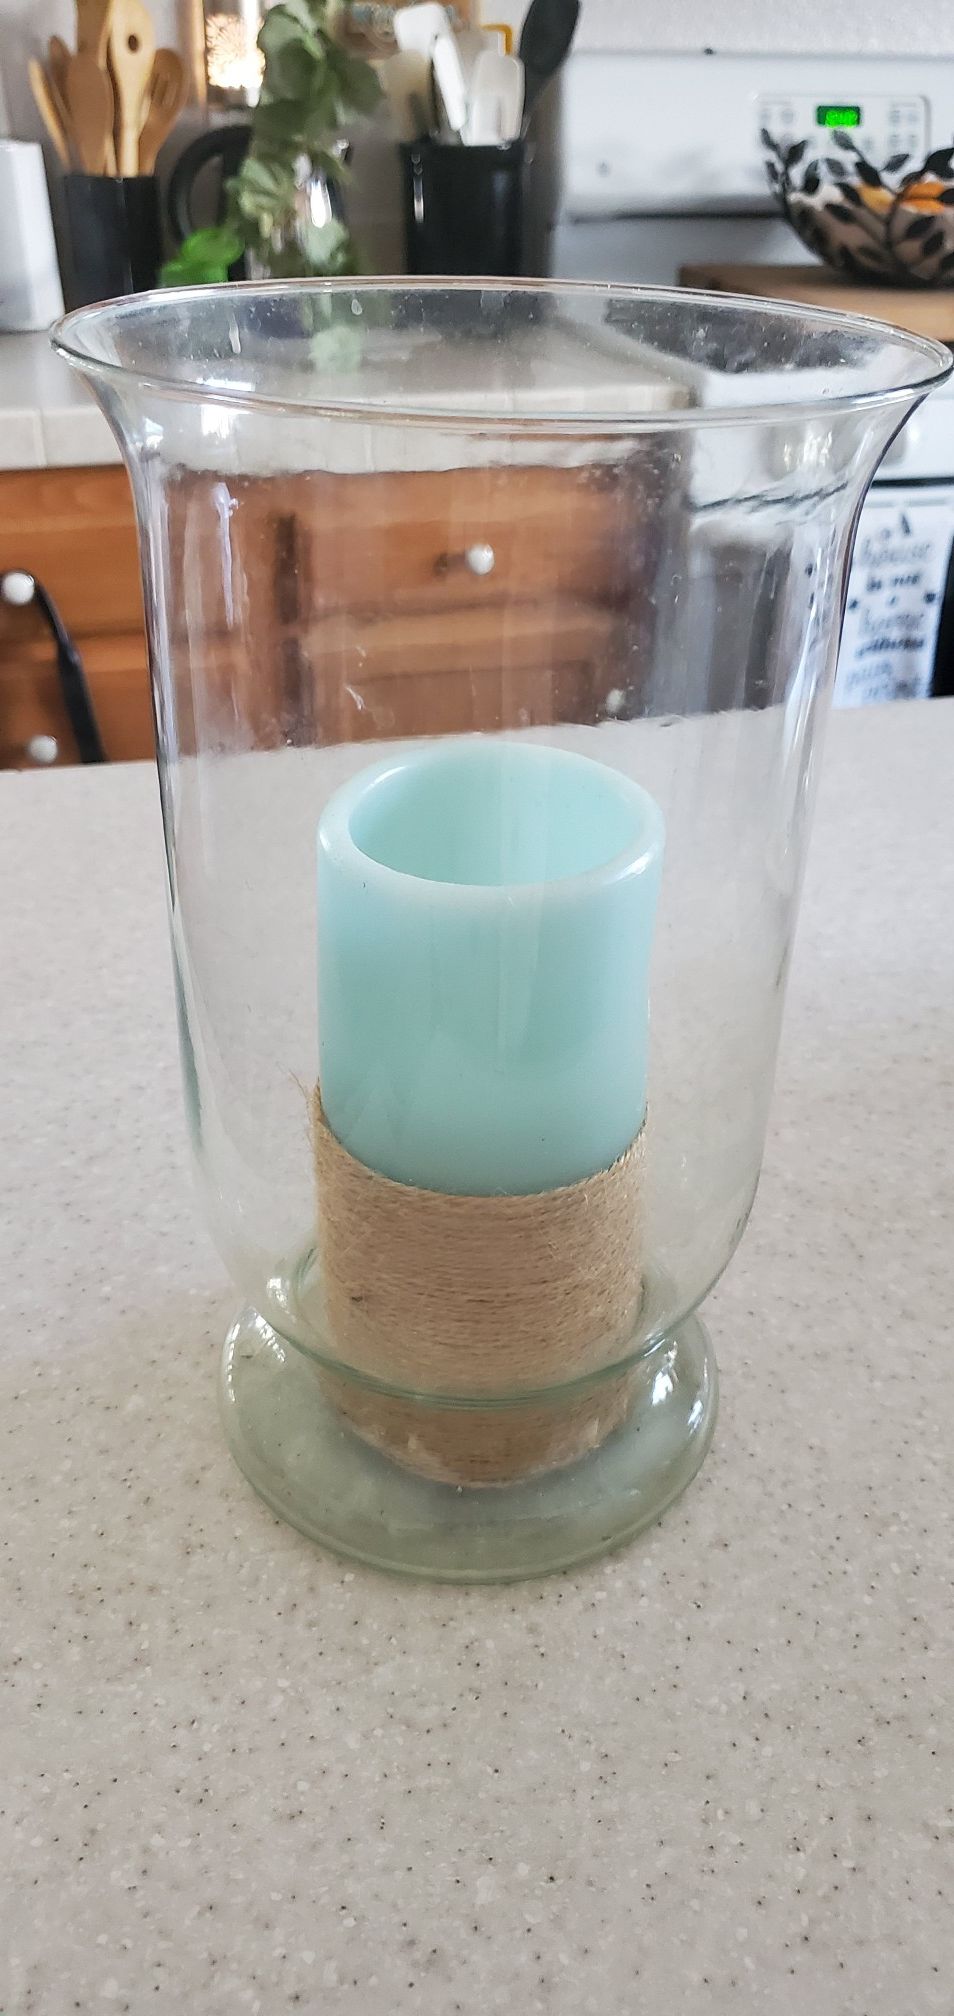 Votive Candle in Hurricane Lamp